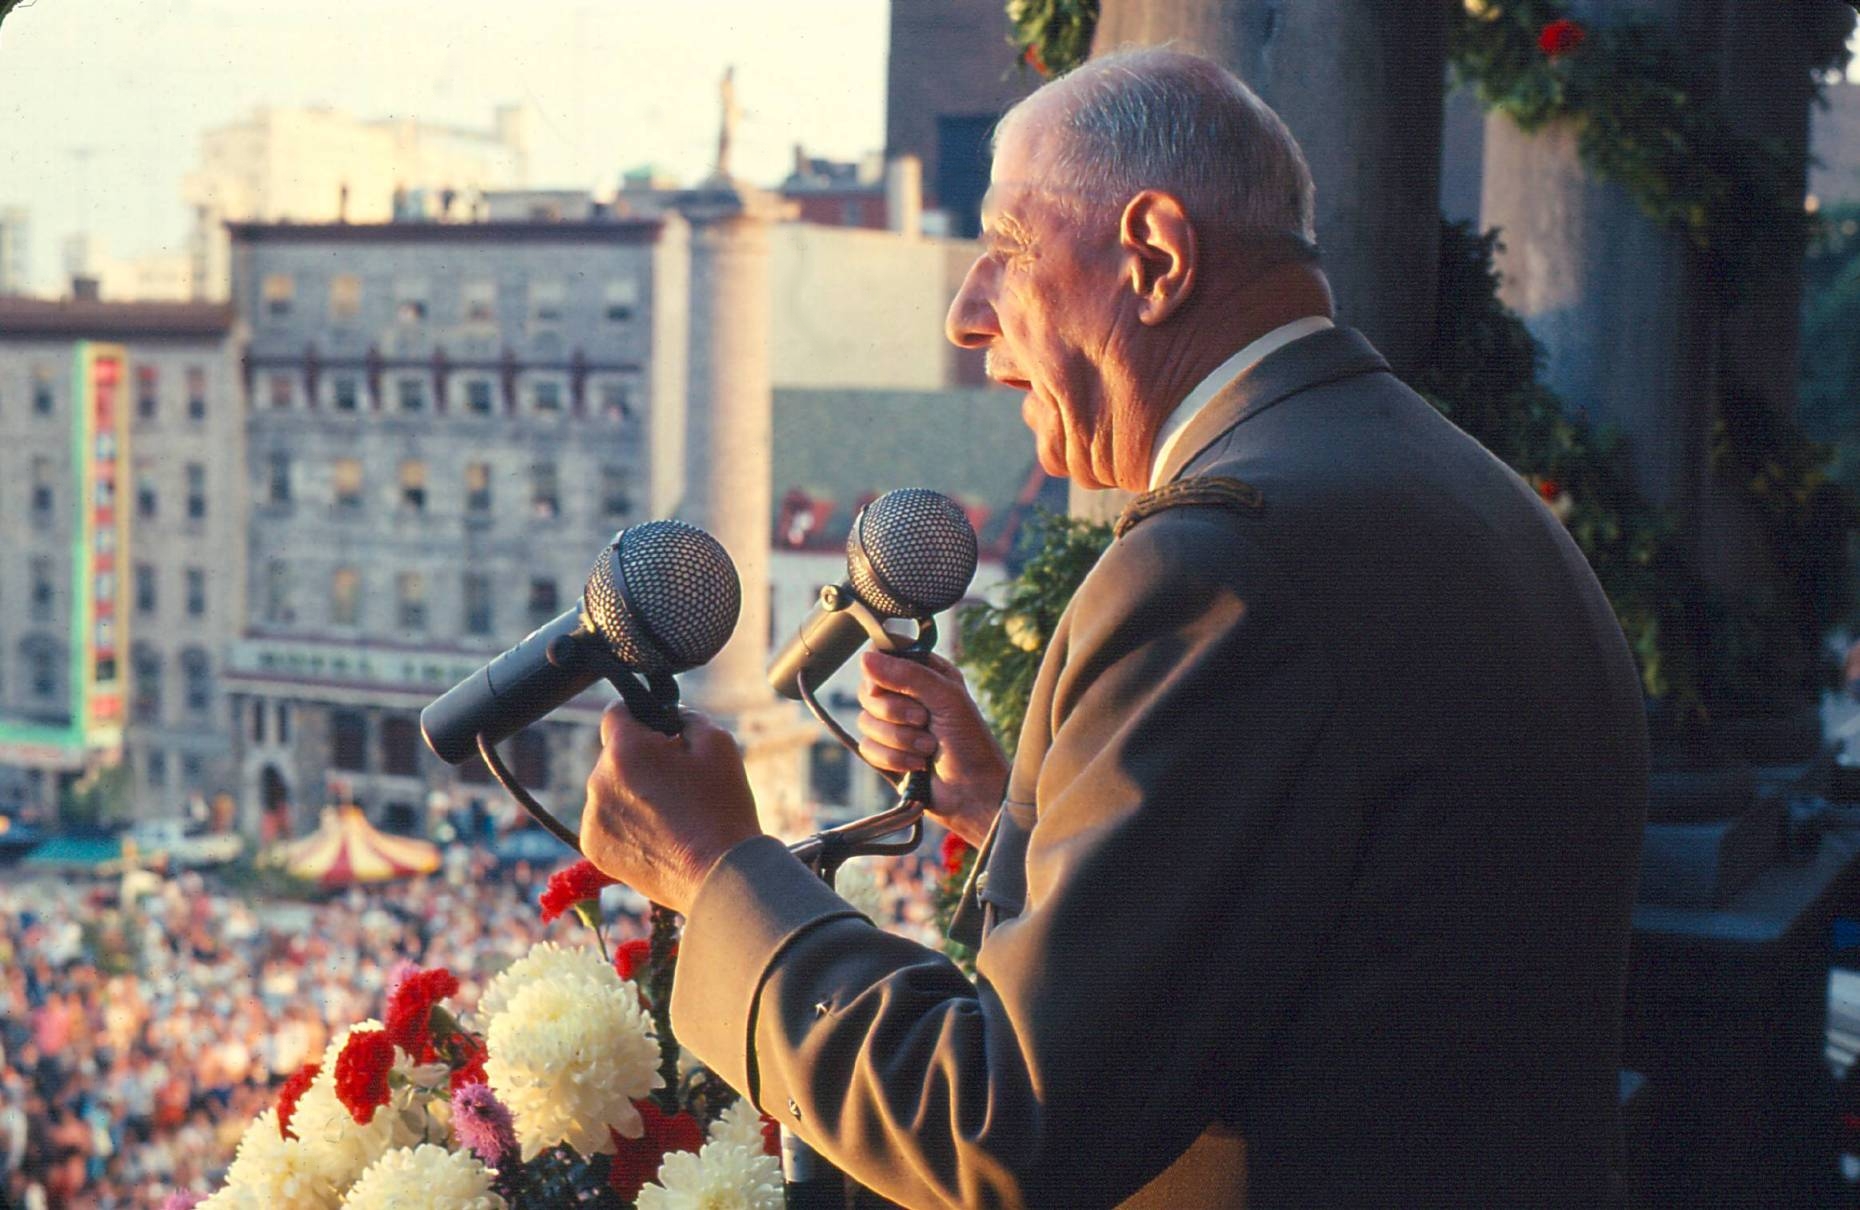 An older man on a balcony grips two microphones and addresses an unseen crowd on the street.